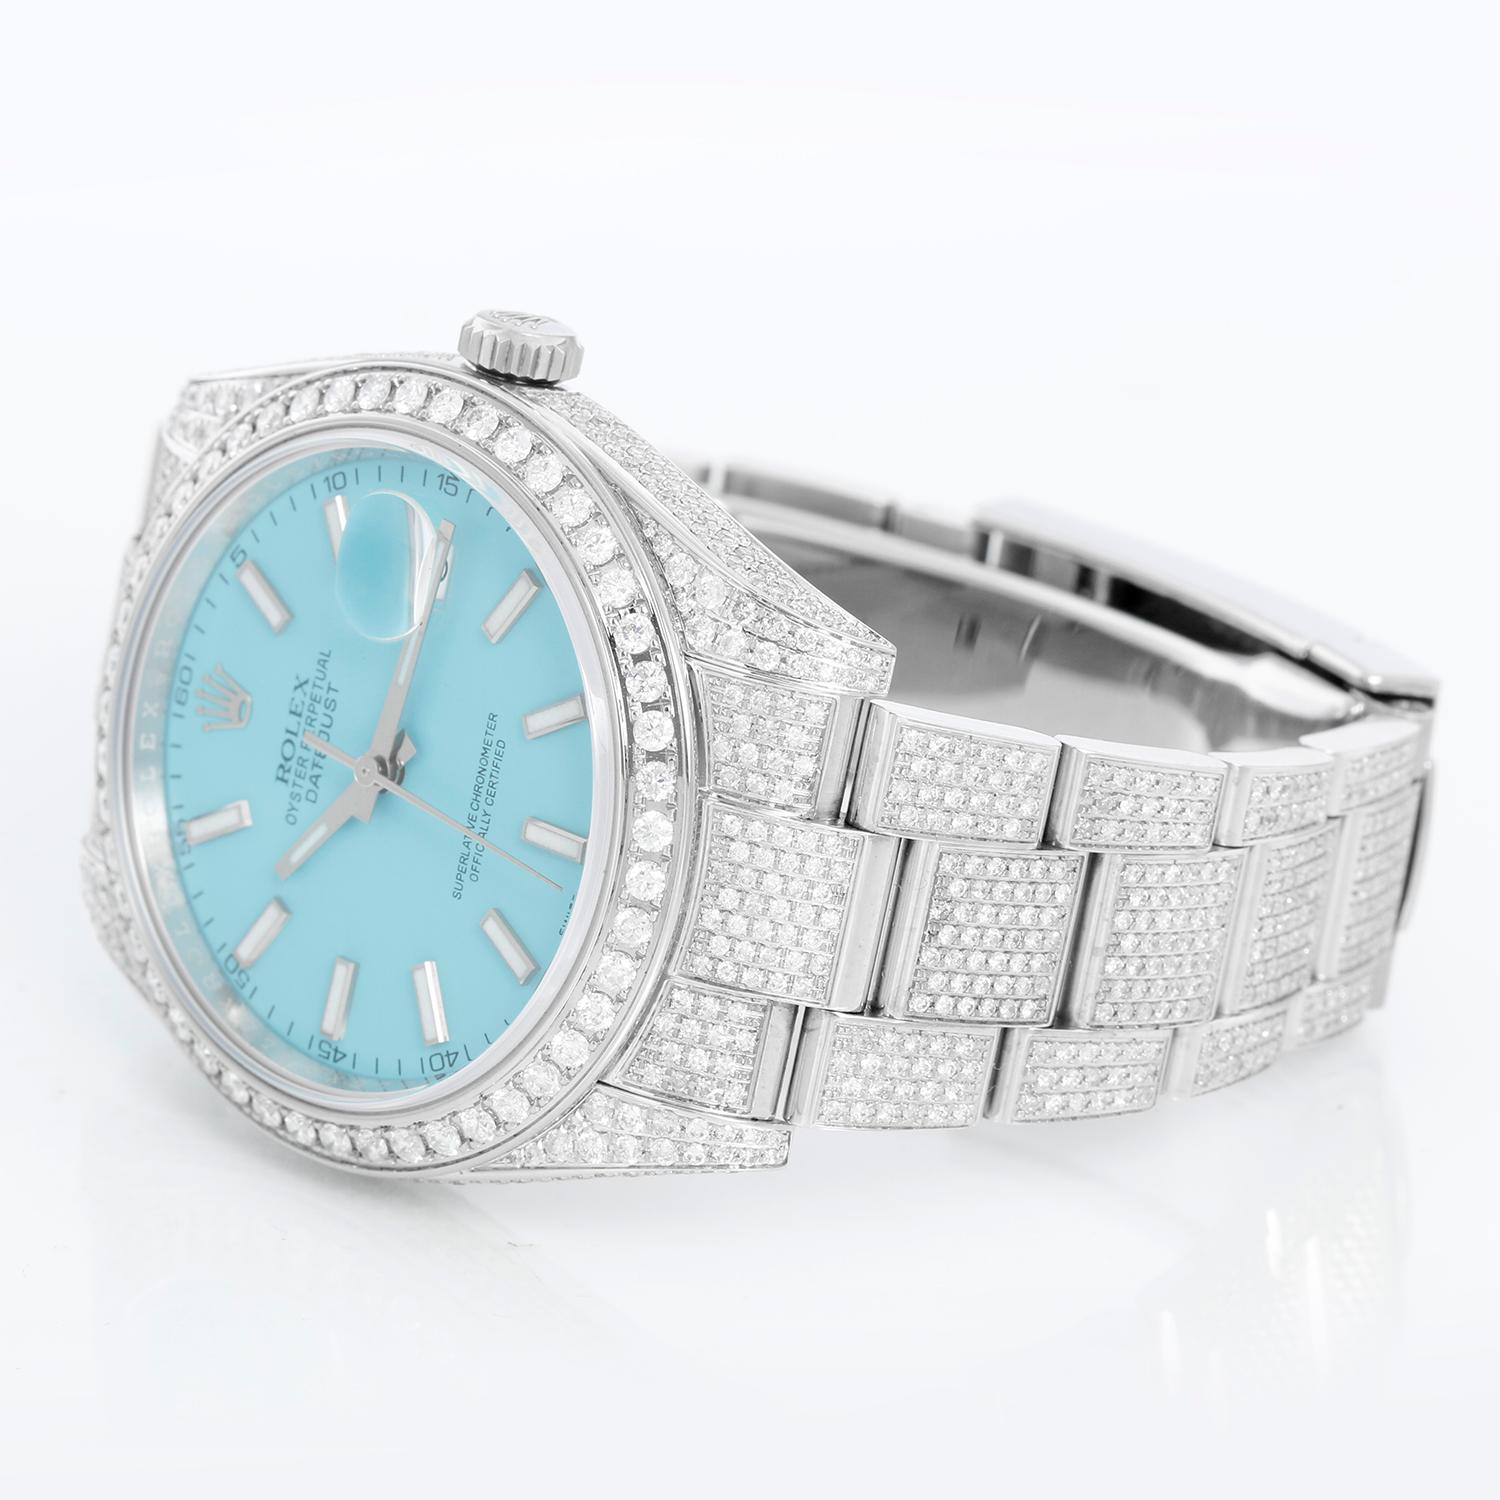 Rolex Datejust II Men's 41mm Stainless Steel Custom Diamond 126300 - Automatic winding, sapphire crystal. Stainless steel case with custom pave diamonds (41mm diameter). Custom Tiffany Blue dial. Stainless steel Oyster bracelet with custom pave